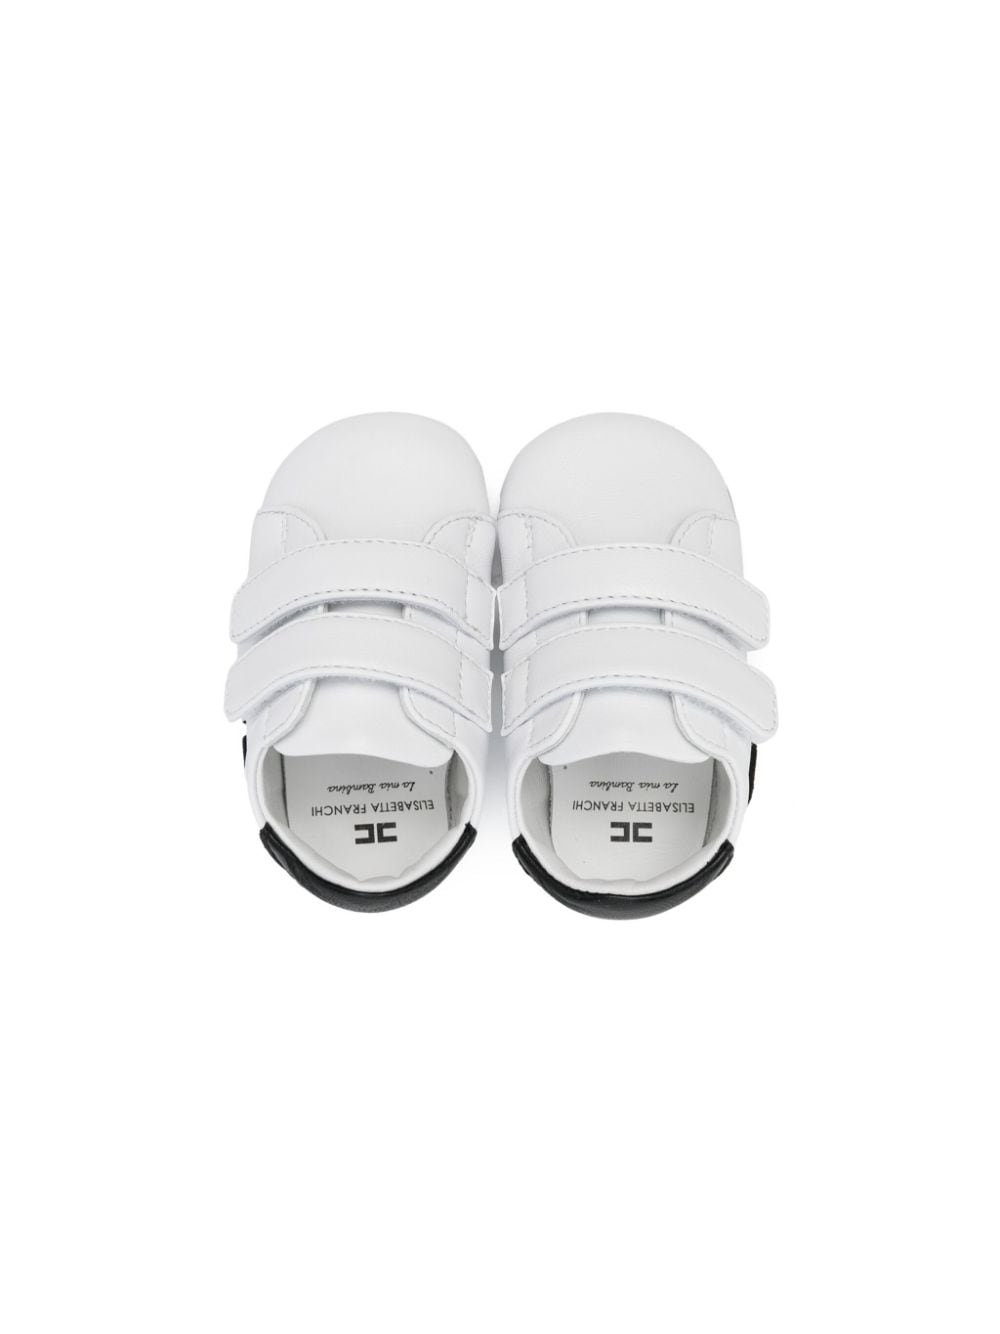 White sneakers for baby girls with black logo